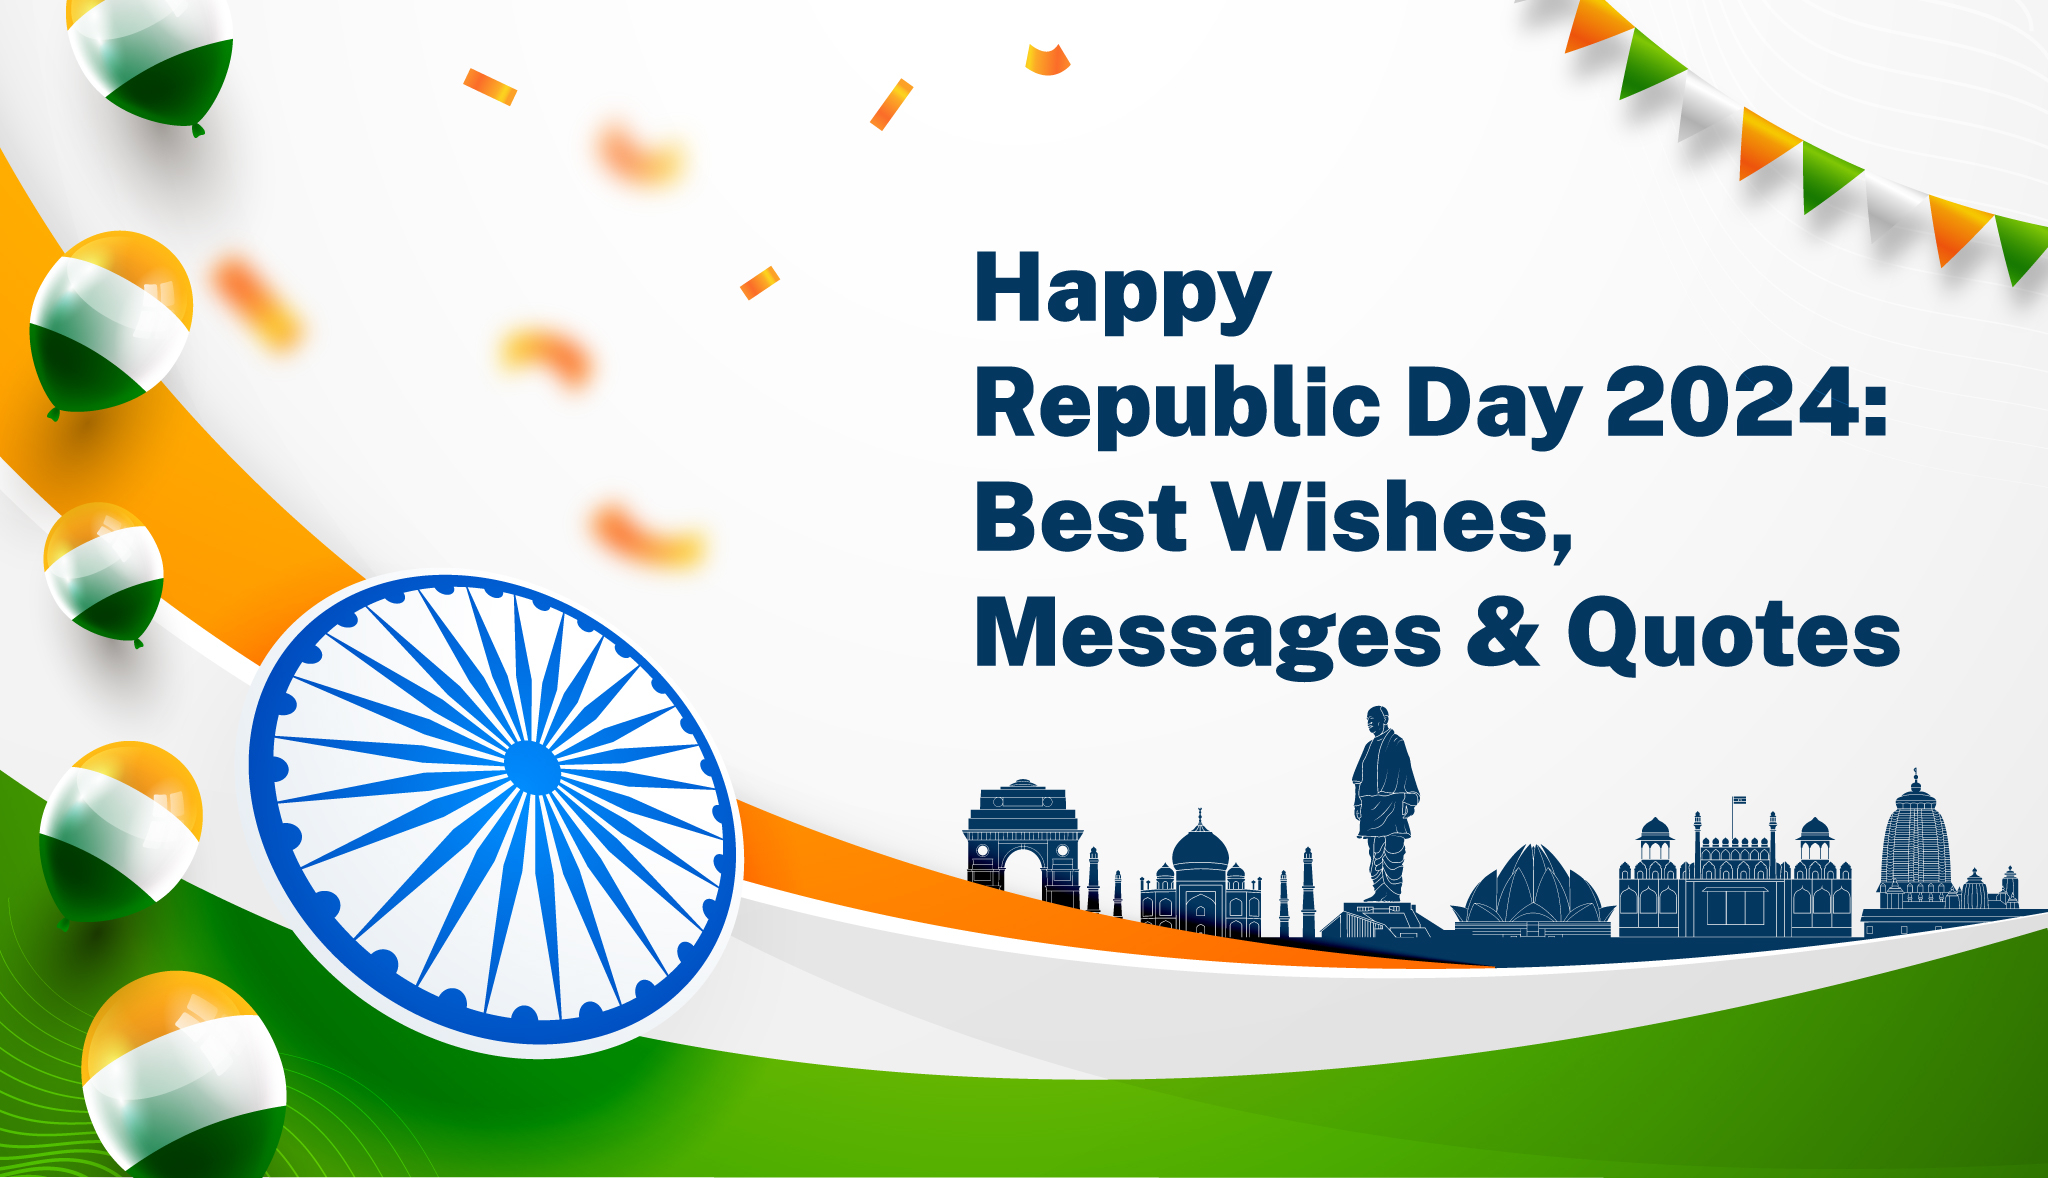 Happy Republic Day 2024: Best Wishes, Messages & Quotes - Postive